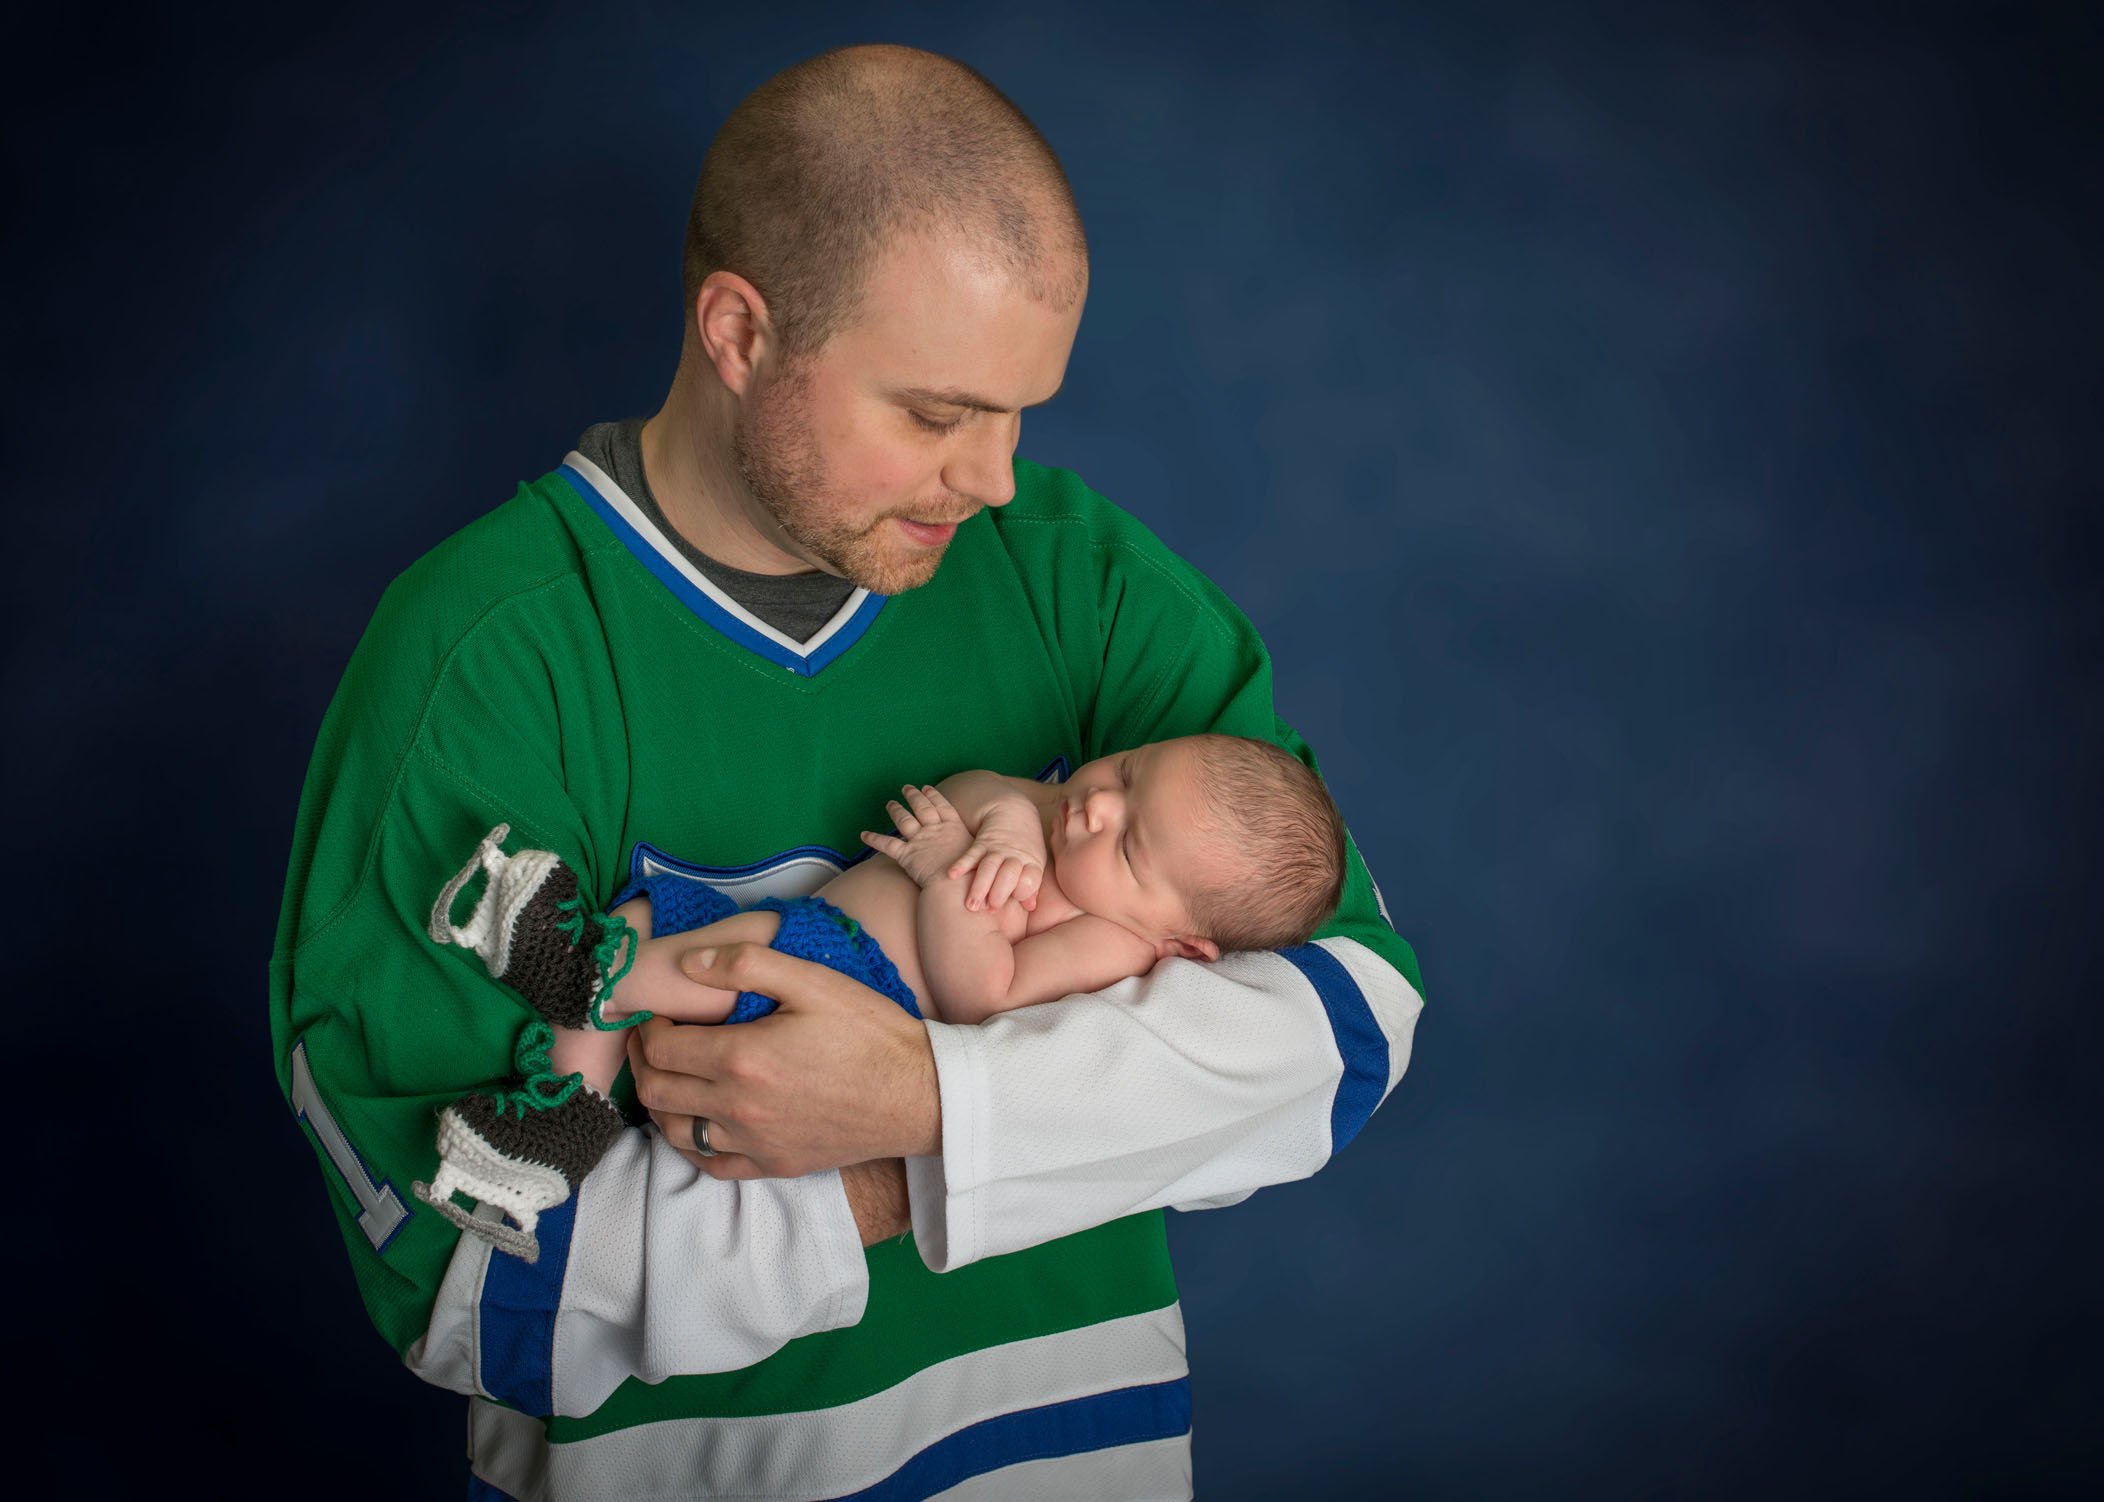 Dad holding newborn daughter while wearing ice hockey jersey and baby in crocheted ice skates